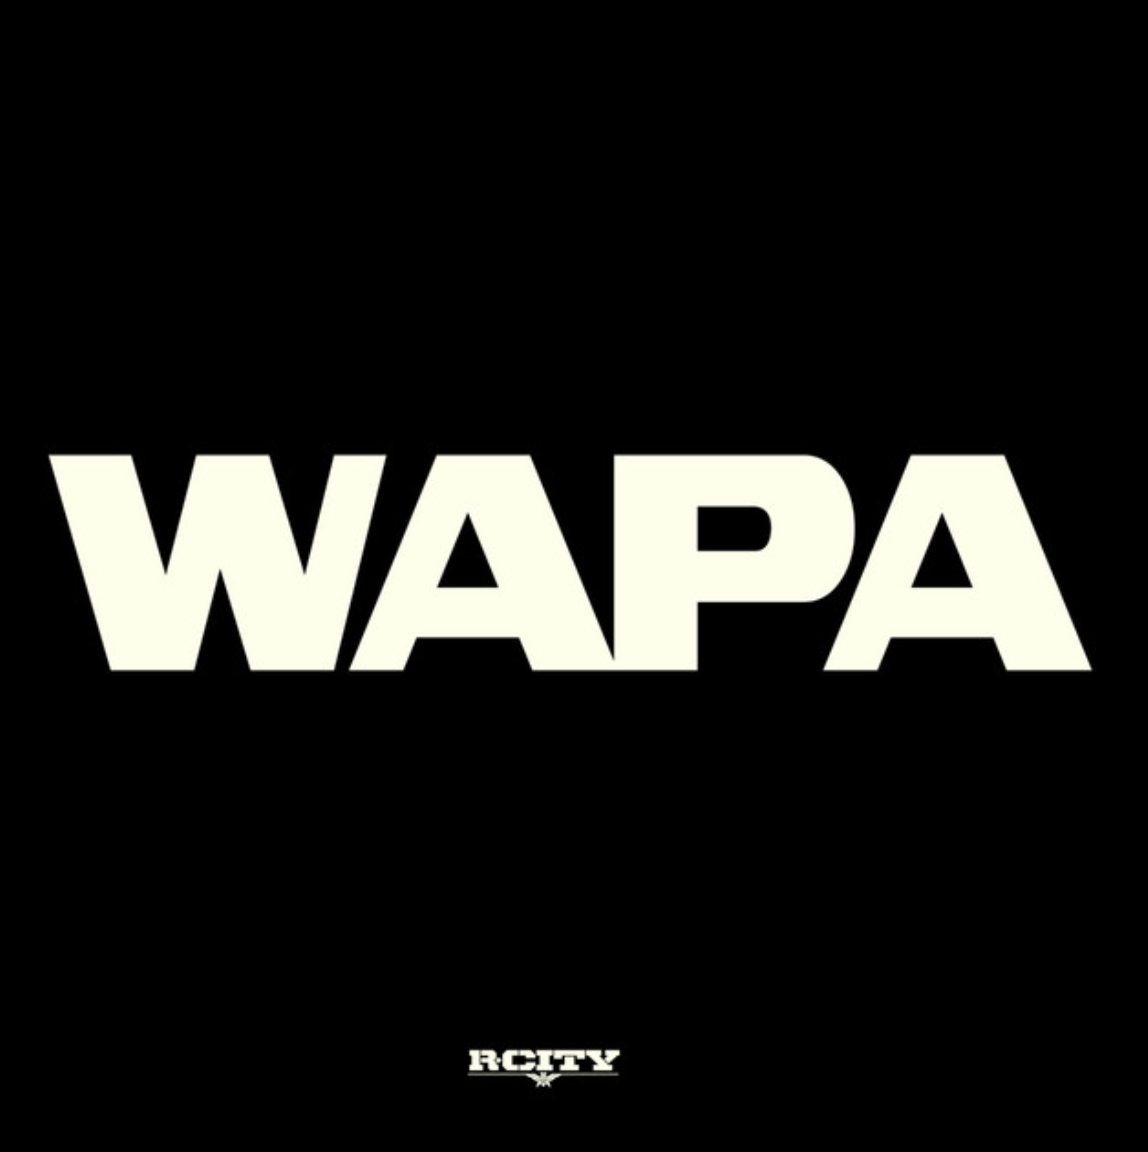 R. City Mixes UK Drill With A Caribbean Twist In “WAPA”